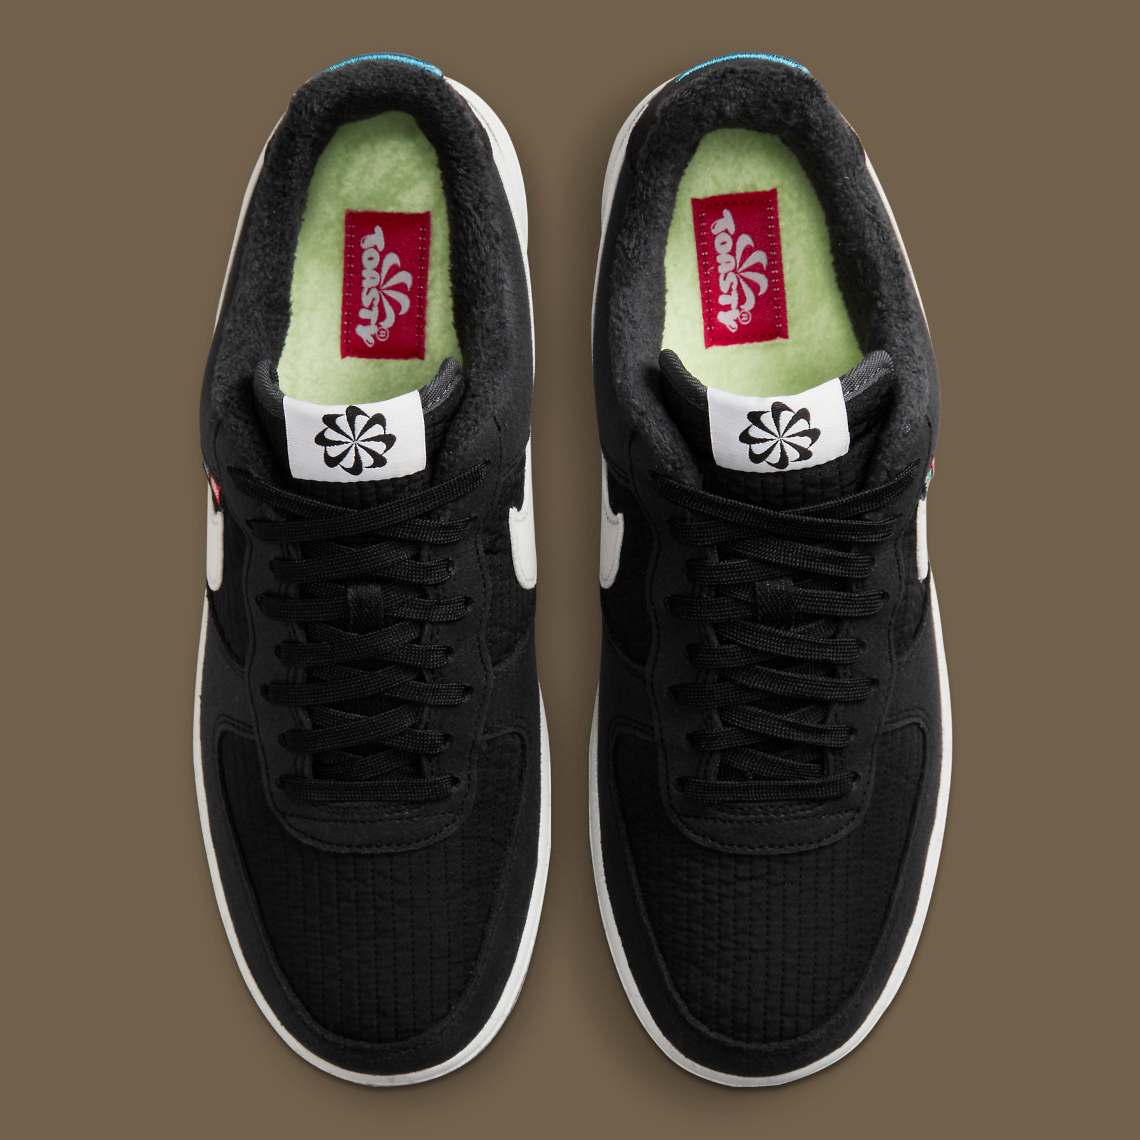 Nike Air Force 1 Low Toasty Black DC8871-001 | SneakerNews.com